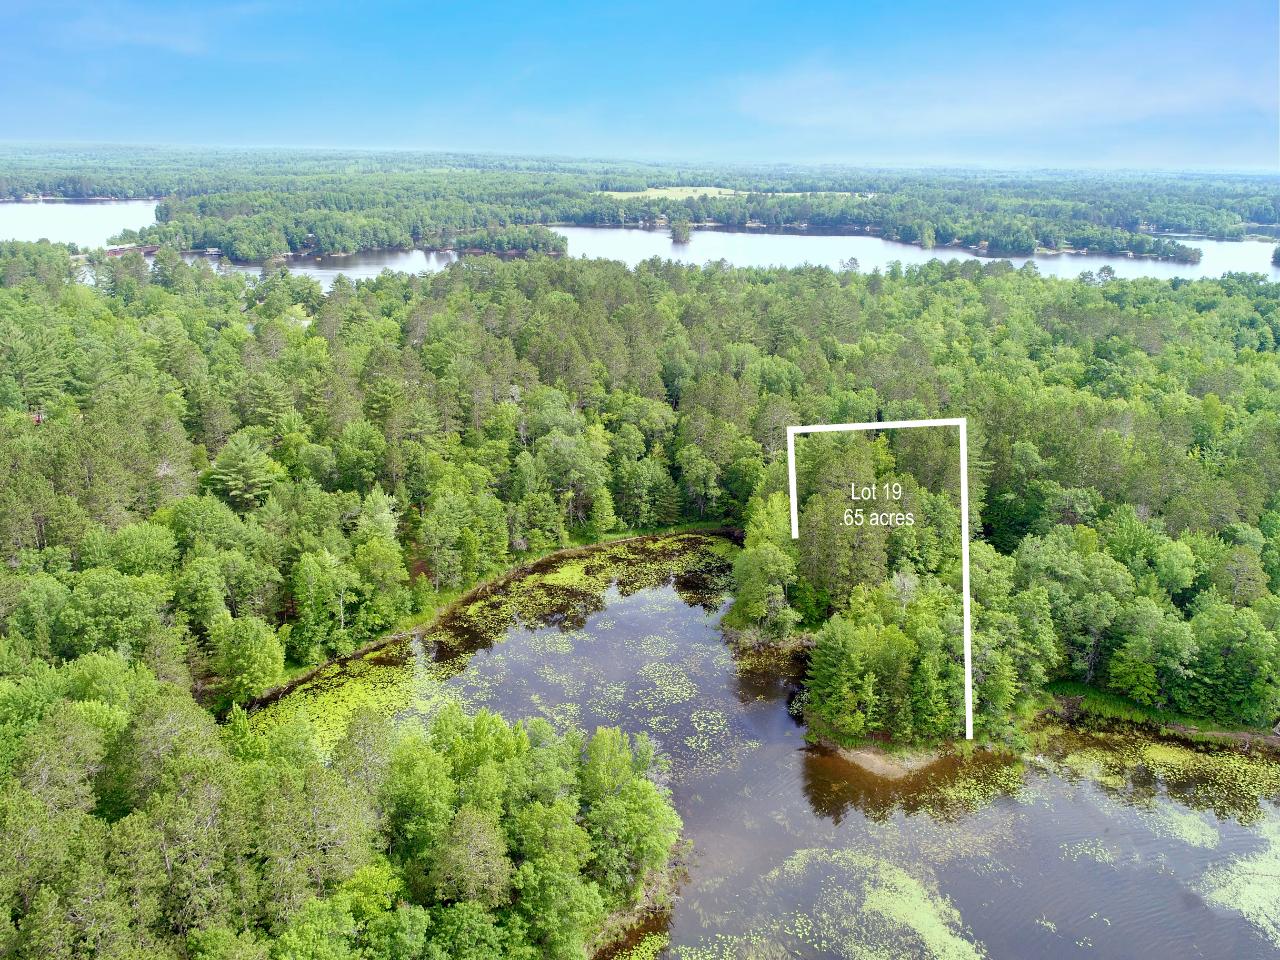 Enjoy the quiet privacy of a dead end road and 266’ of frontage on Deer Lake. This lot has .65 acres of towering pines and hardwoods, perfect for your Northwoods dream home. Established trails run through the property with many great clearings started for the building process. Deer Lake is a 150 acre full rec lake with a max depth of 62 ft. In additional, gain access to Lake Nokomis and Bridge Lake through a small channel when water levels are up. Great location being close enough to many restaurants, shopping and other necessities. Natural gas and electric available at the road. All lots are marked with a sign and pink ribbon.